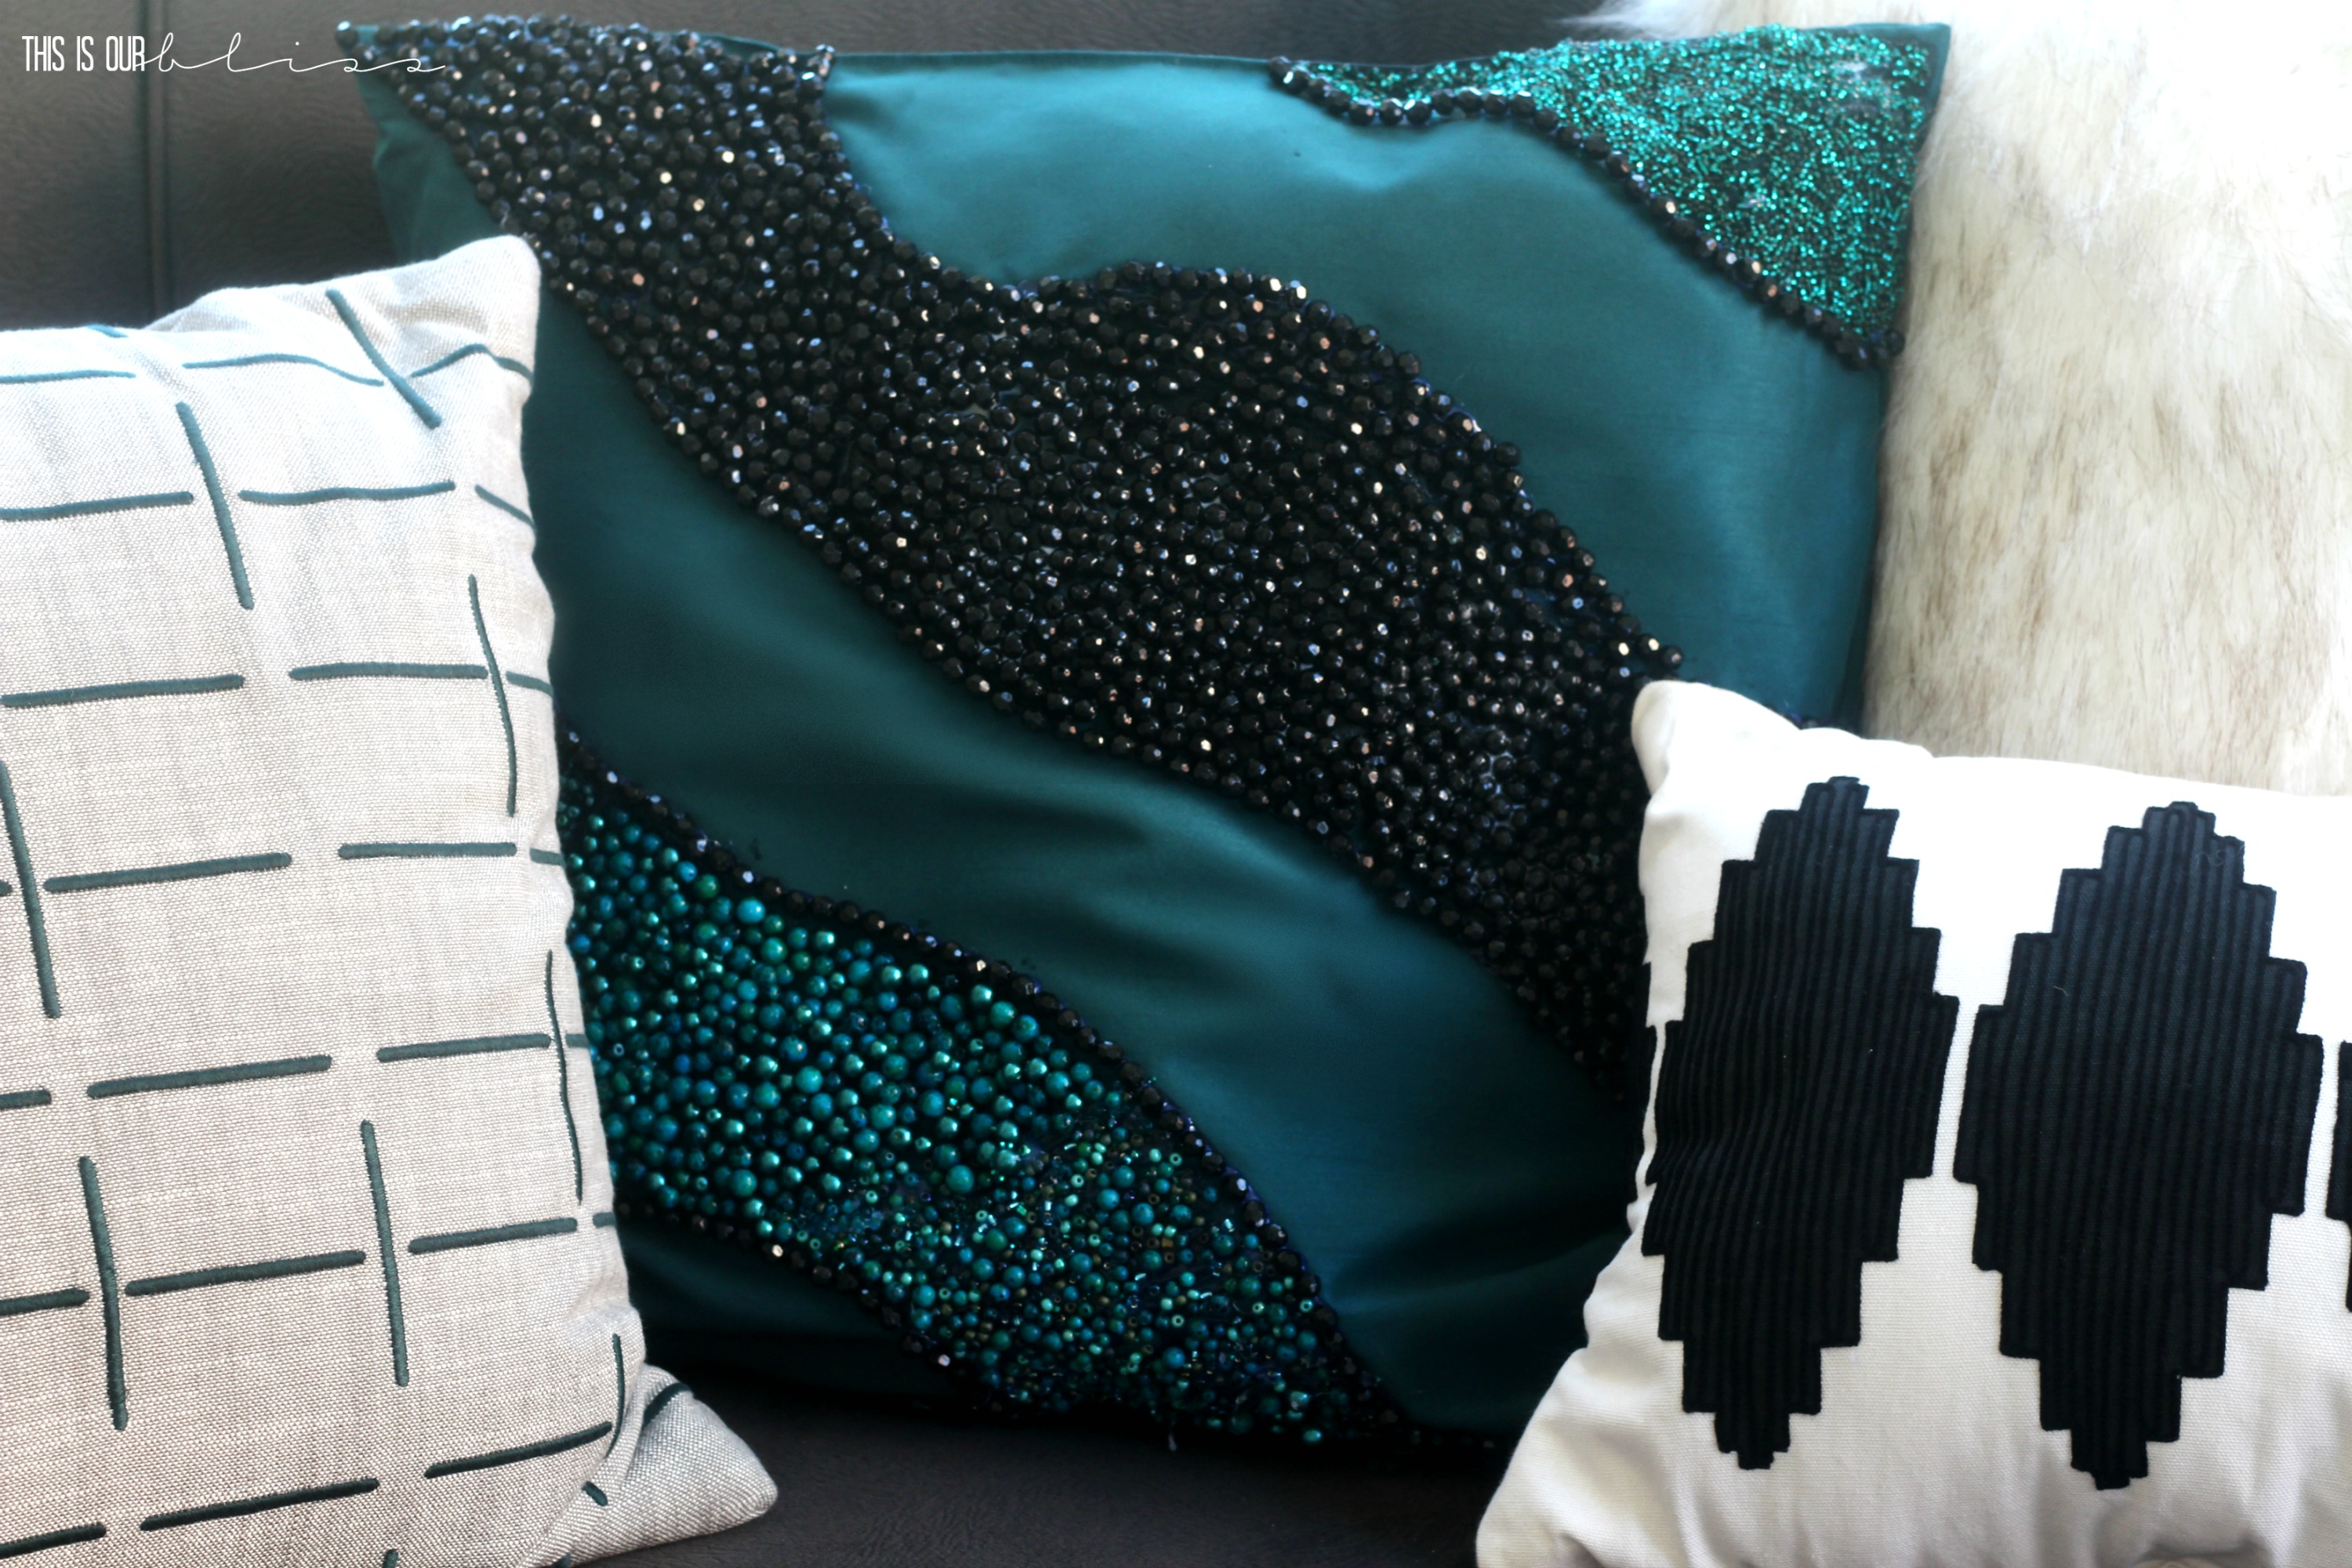 West Elm Inspired beaded pillow | DIY beaded pillow | This is our Bliss | www.thisisourbliss.com